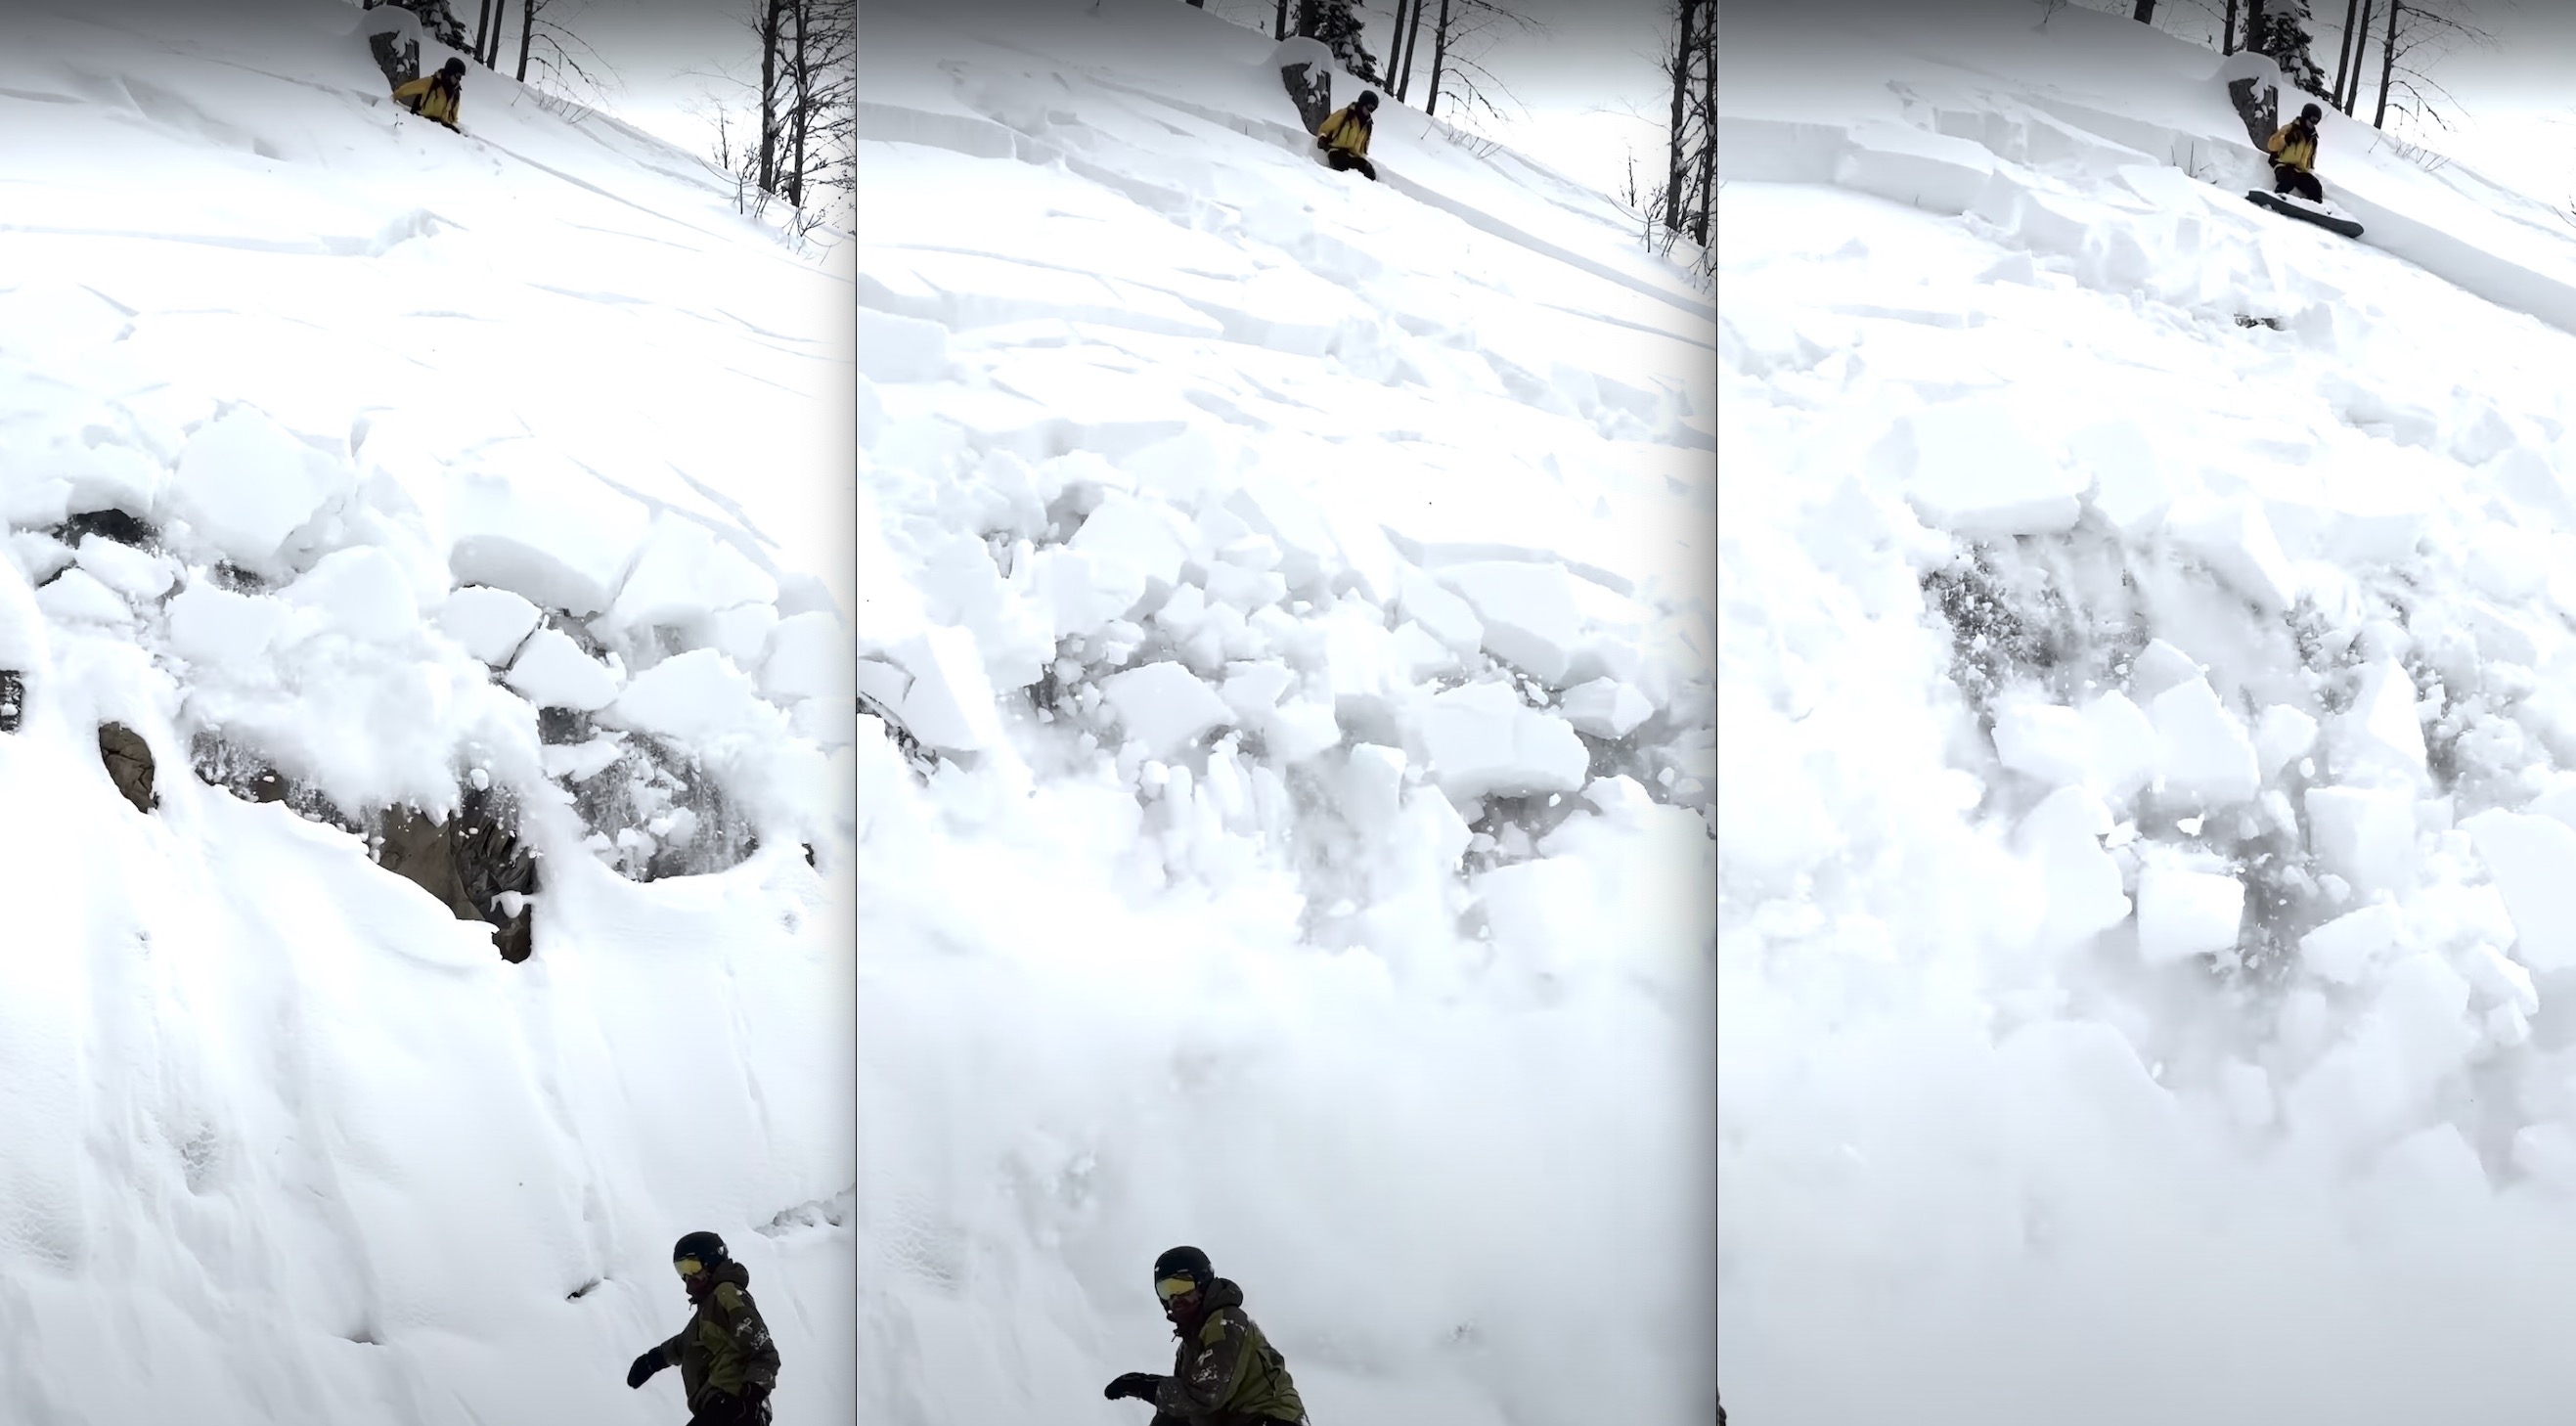 VIDEO: Snowboarder On Cat Track Narrowly Escapes Avalanche Triggered From Above